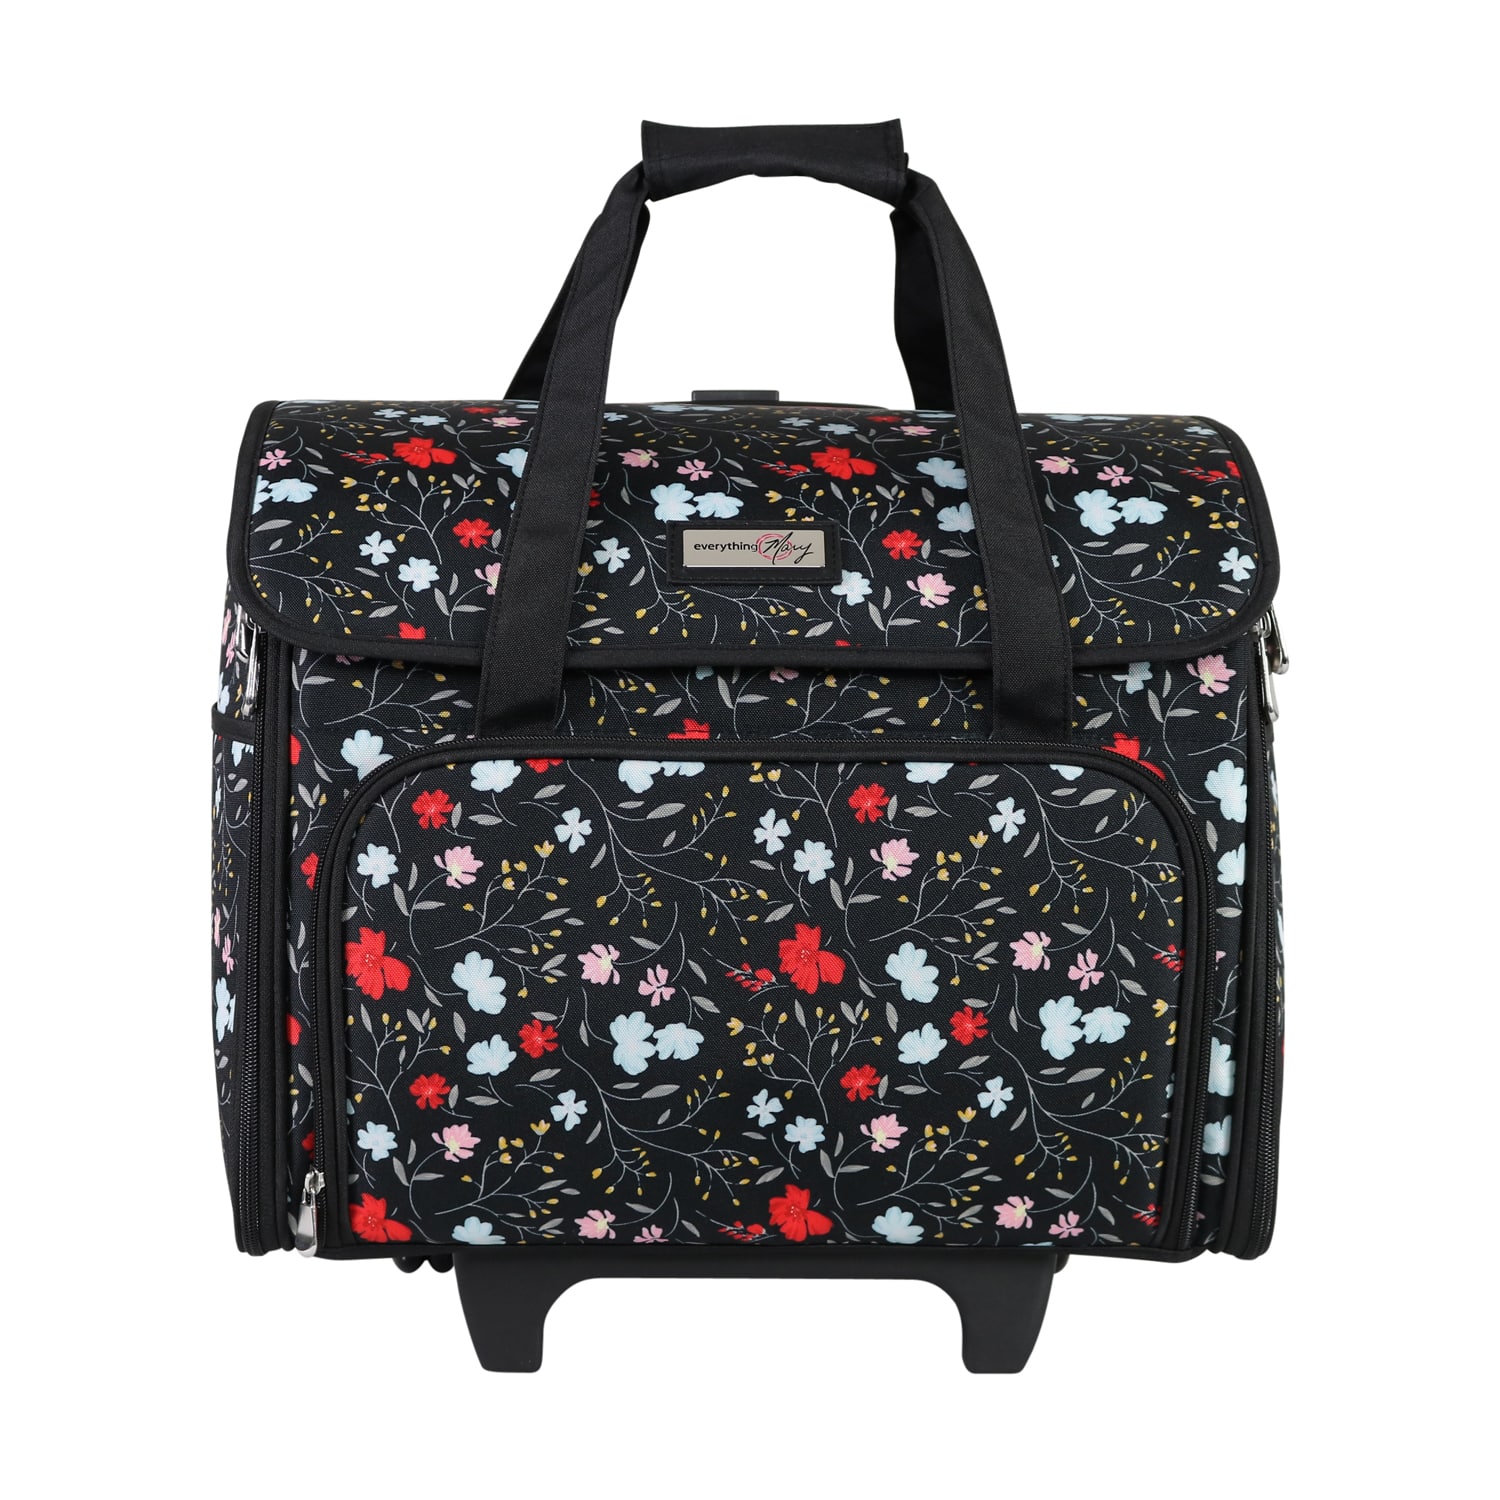 Everything Mary Black Floral Teacher Rolling Tote, Michaels